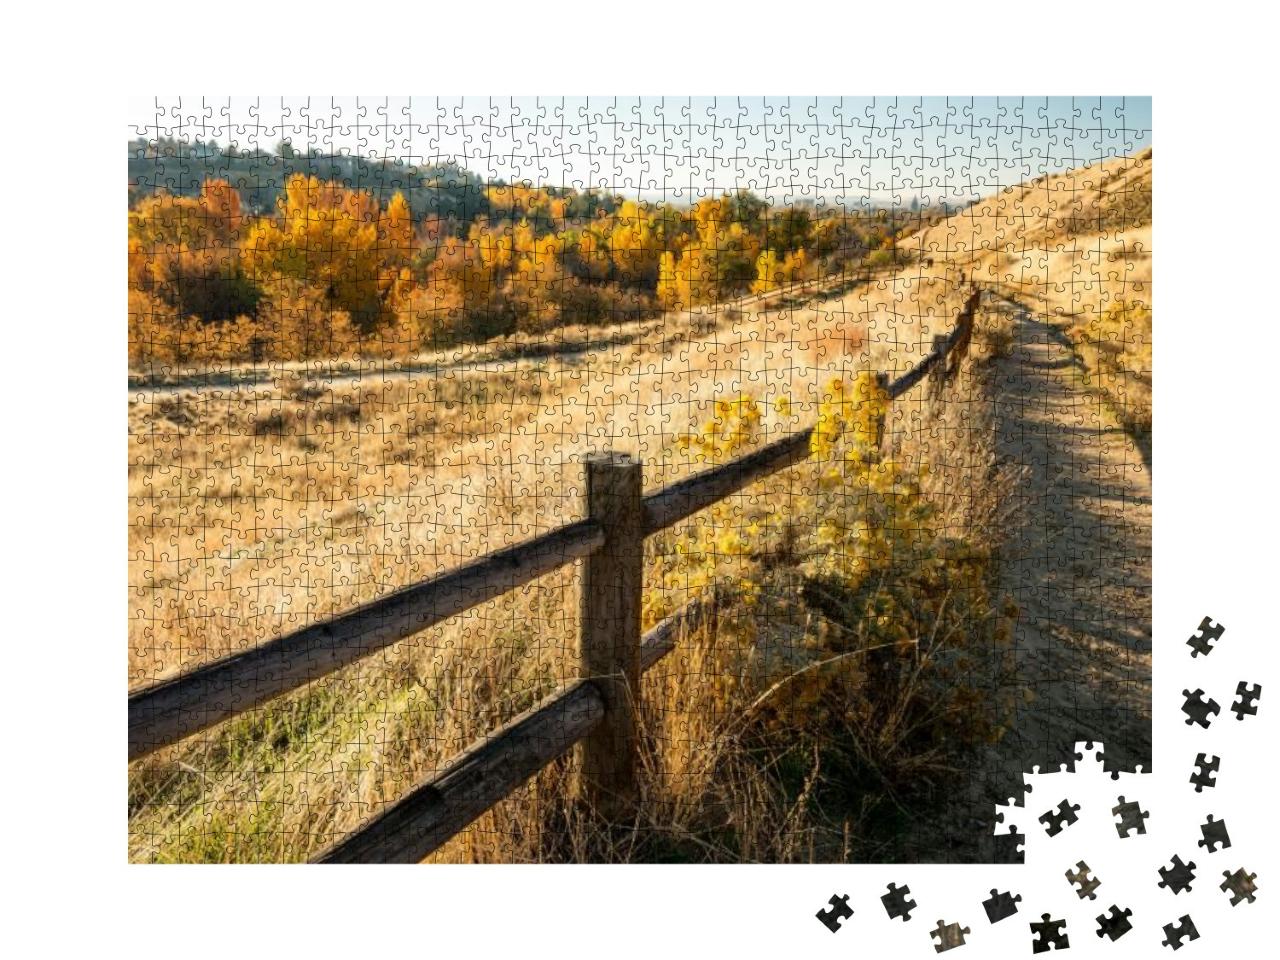 Wood Rail Fence Leads Along a Path in the Fall... Jigsaw Puzzle with 1000 pieces